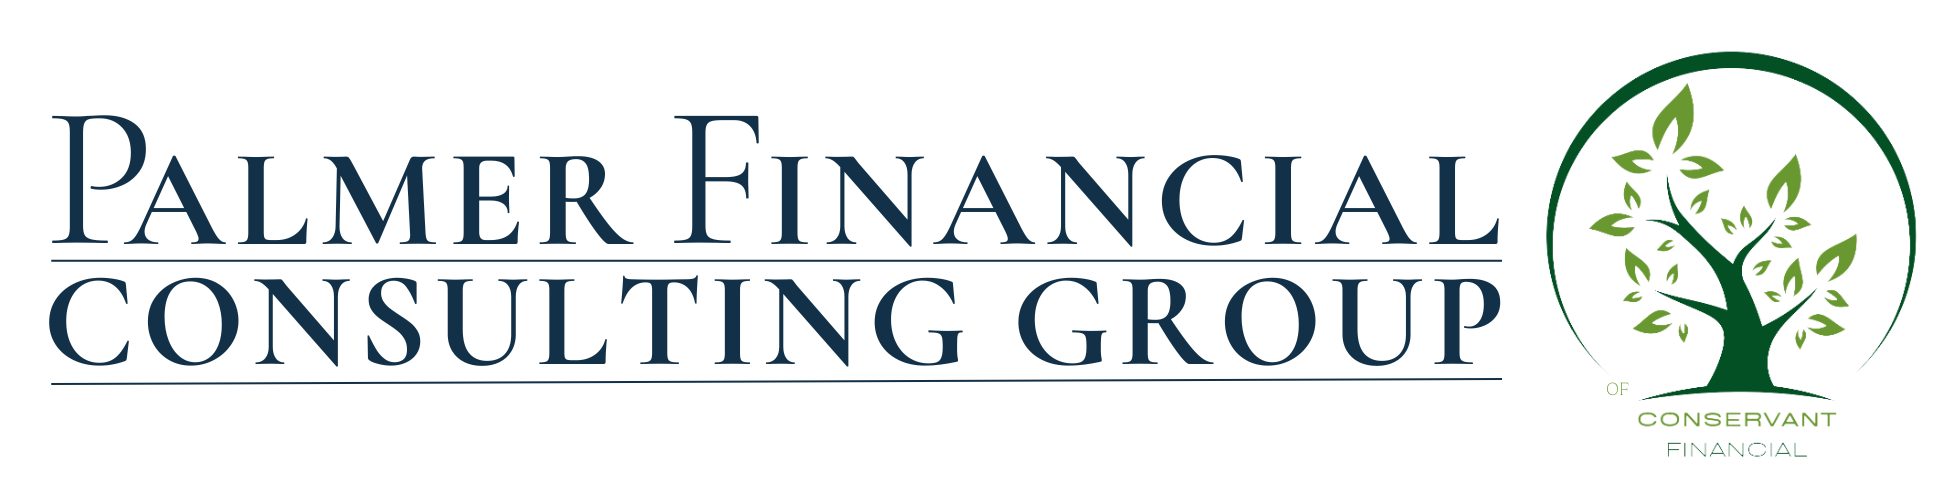 Palmer Financial  Consulting Group